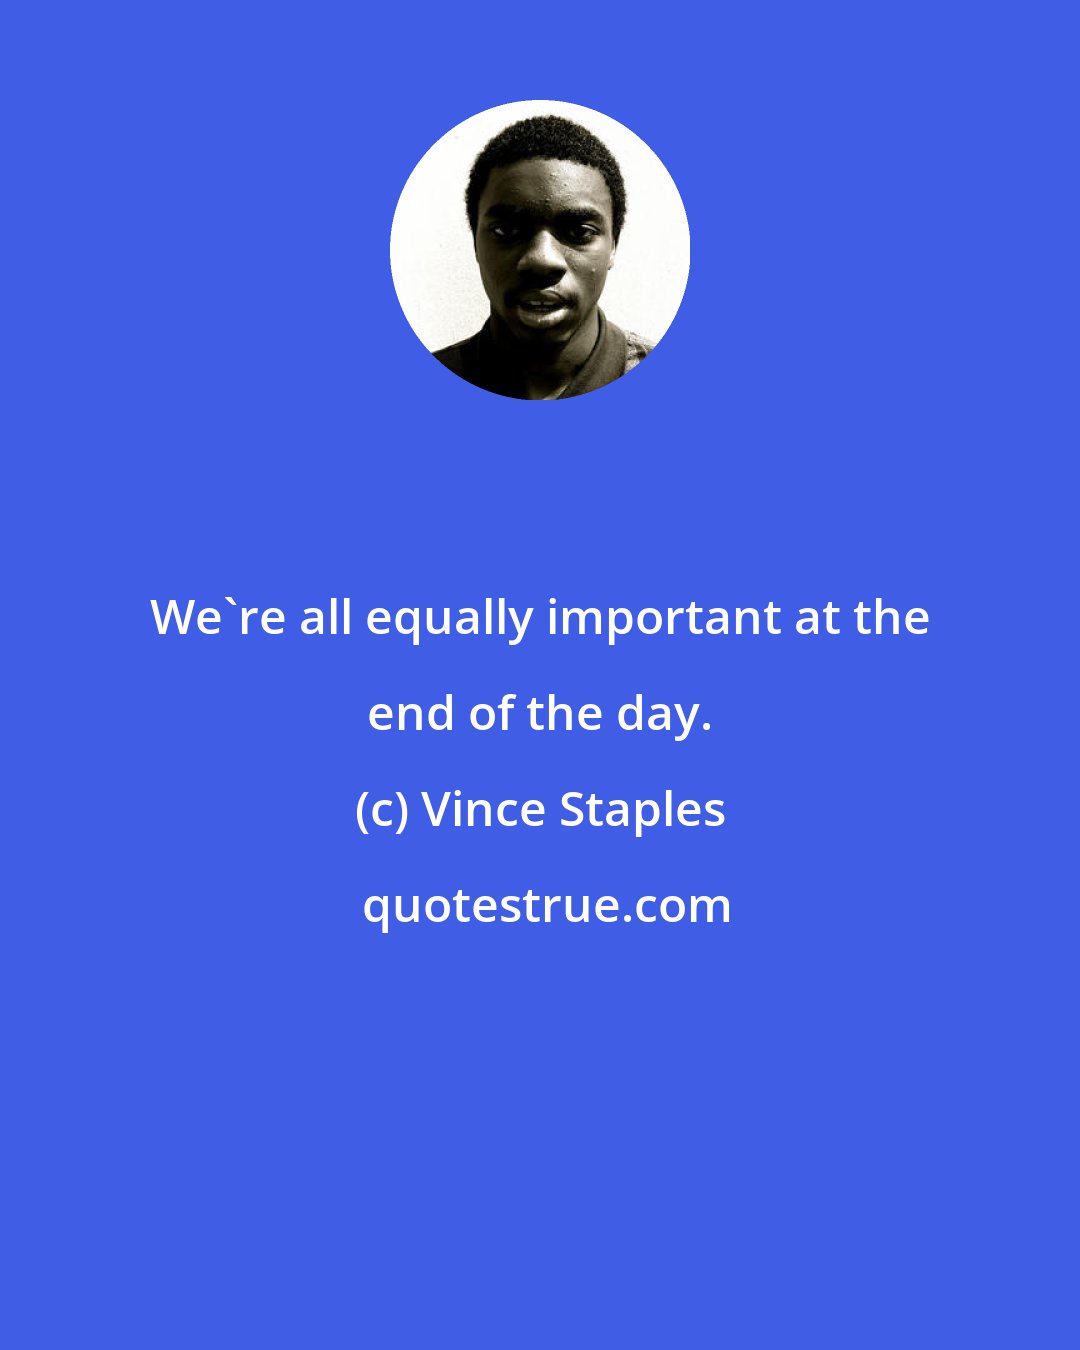 Vince Staples: We're all equally important at the end of the day.